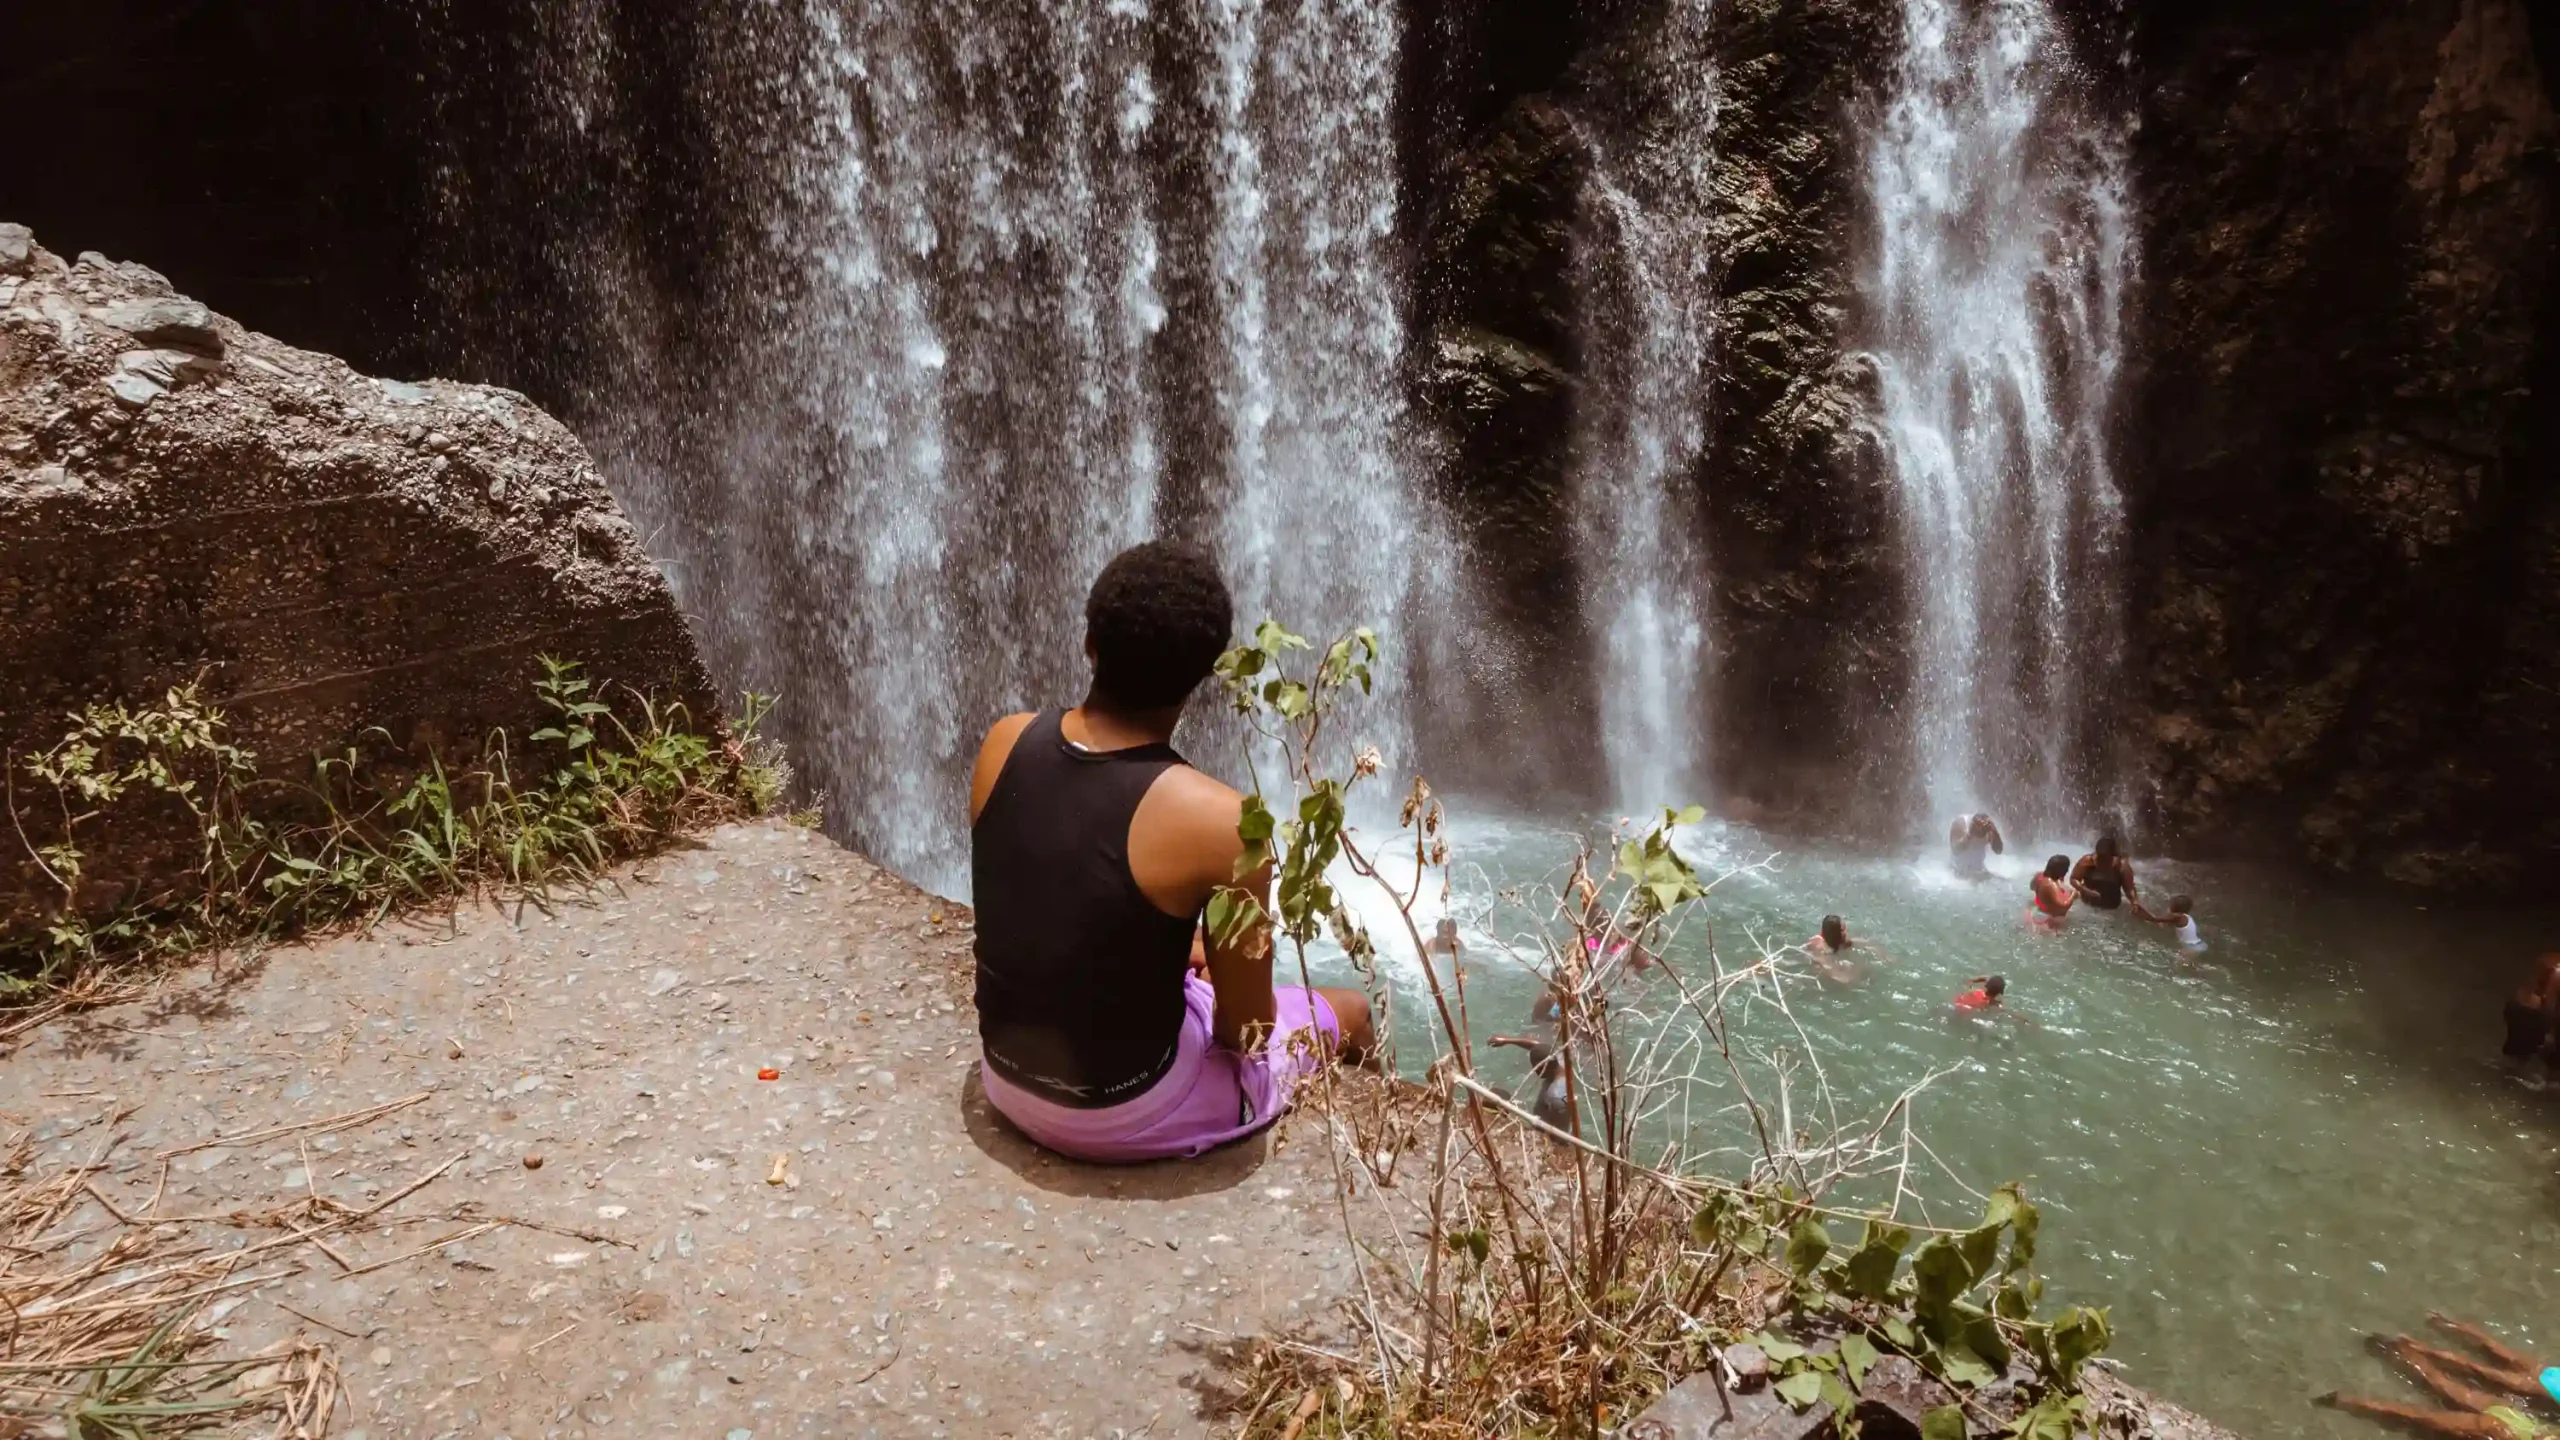 A woman sitting on the edge of a waterfall, enjoying the serene view.